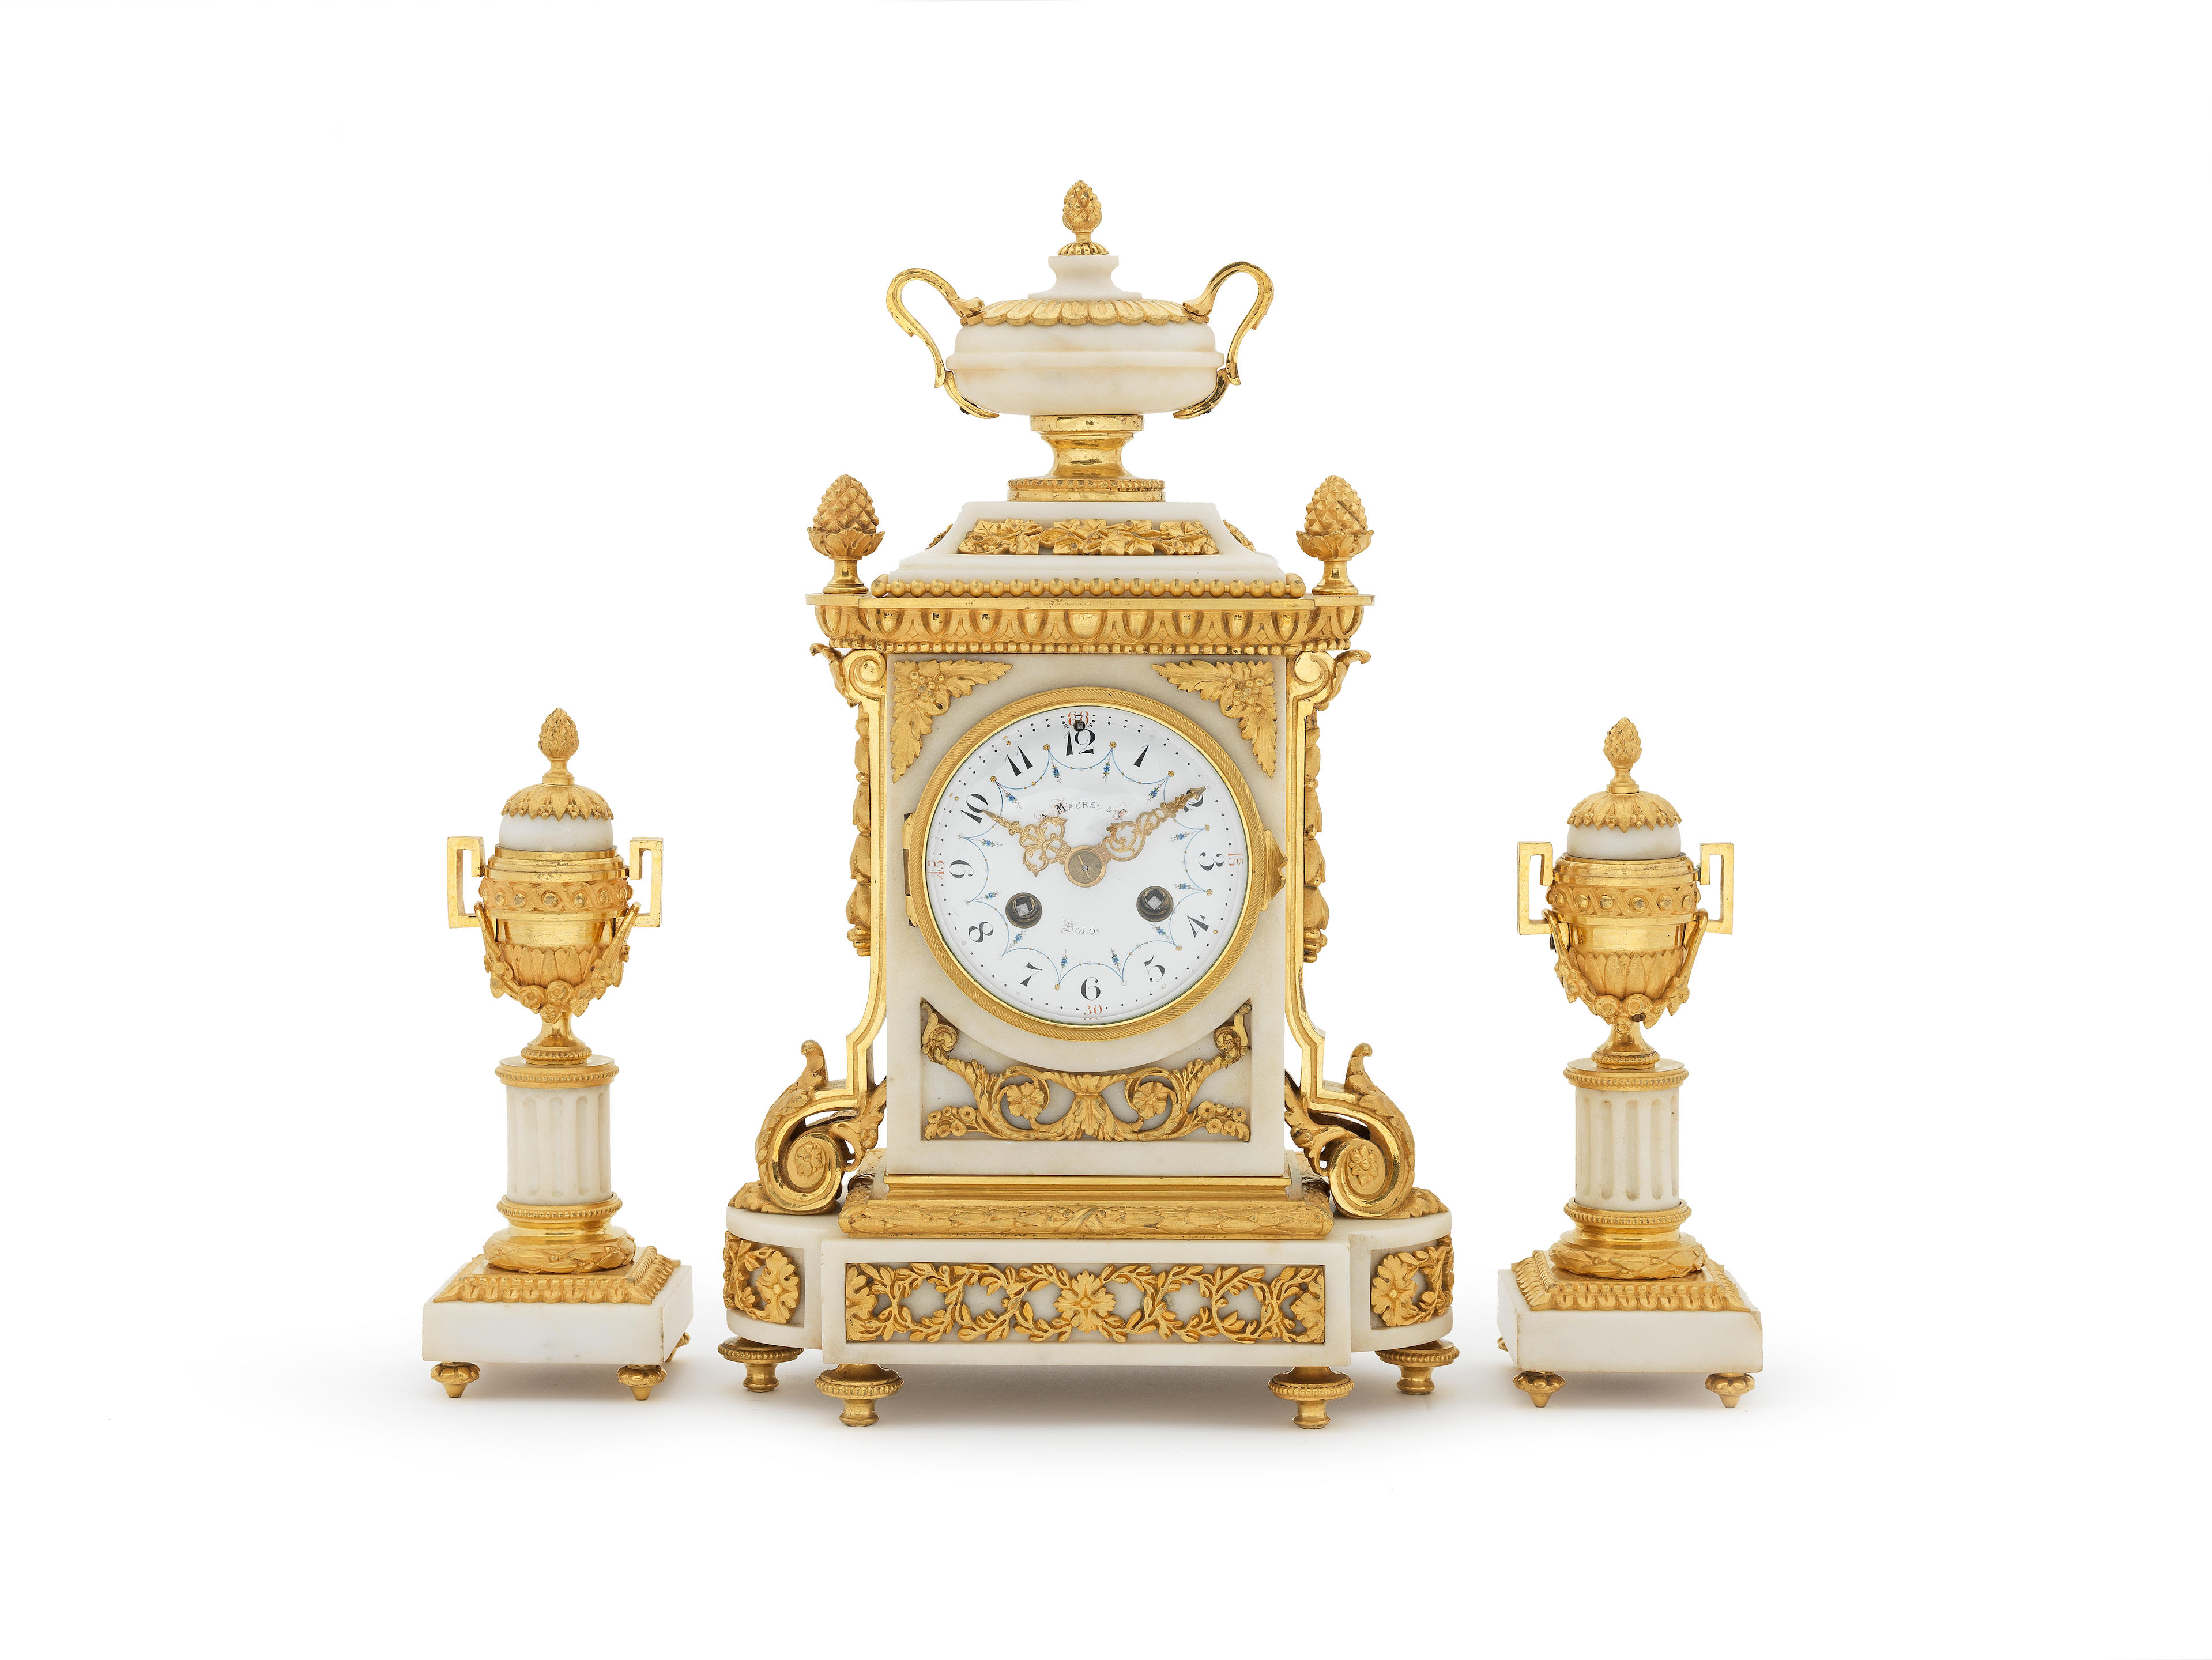 Bonhams : A pair of late Louis XVI ormolu and white marble cassolettes  Early 19th century